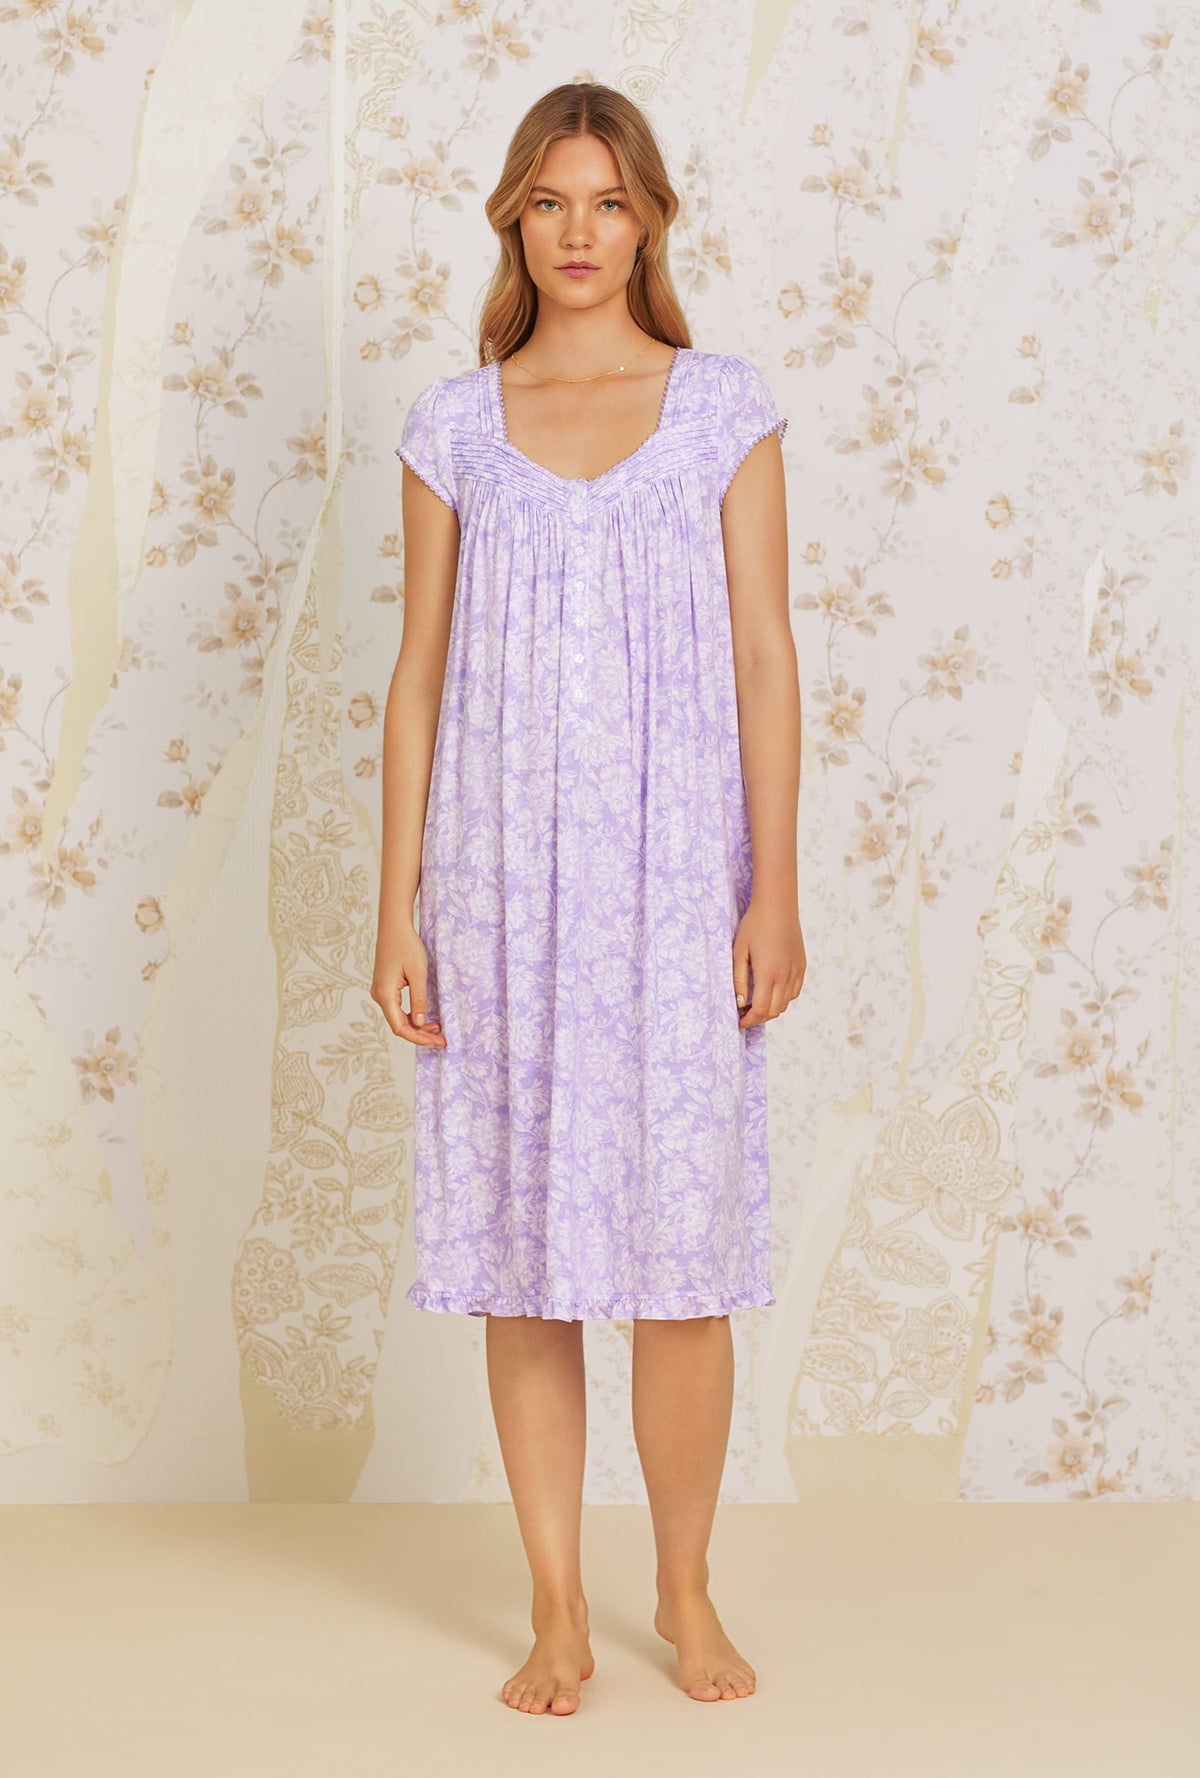 A lady wearing purple short sleeve Floral Knit Waltz Nightgown with Lilac Dream print